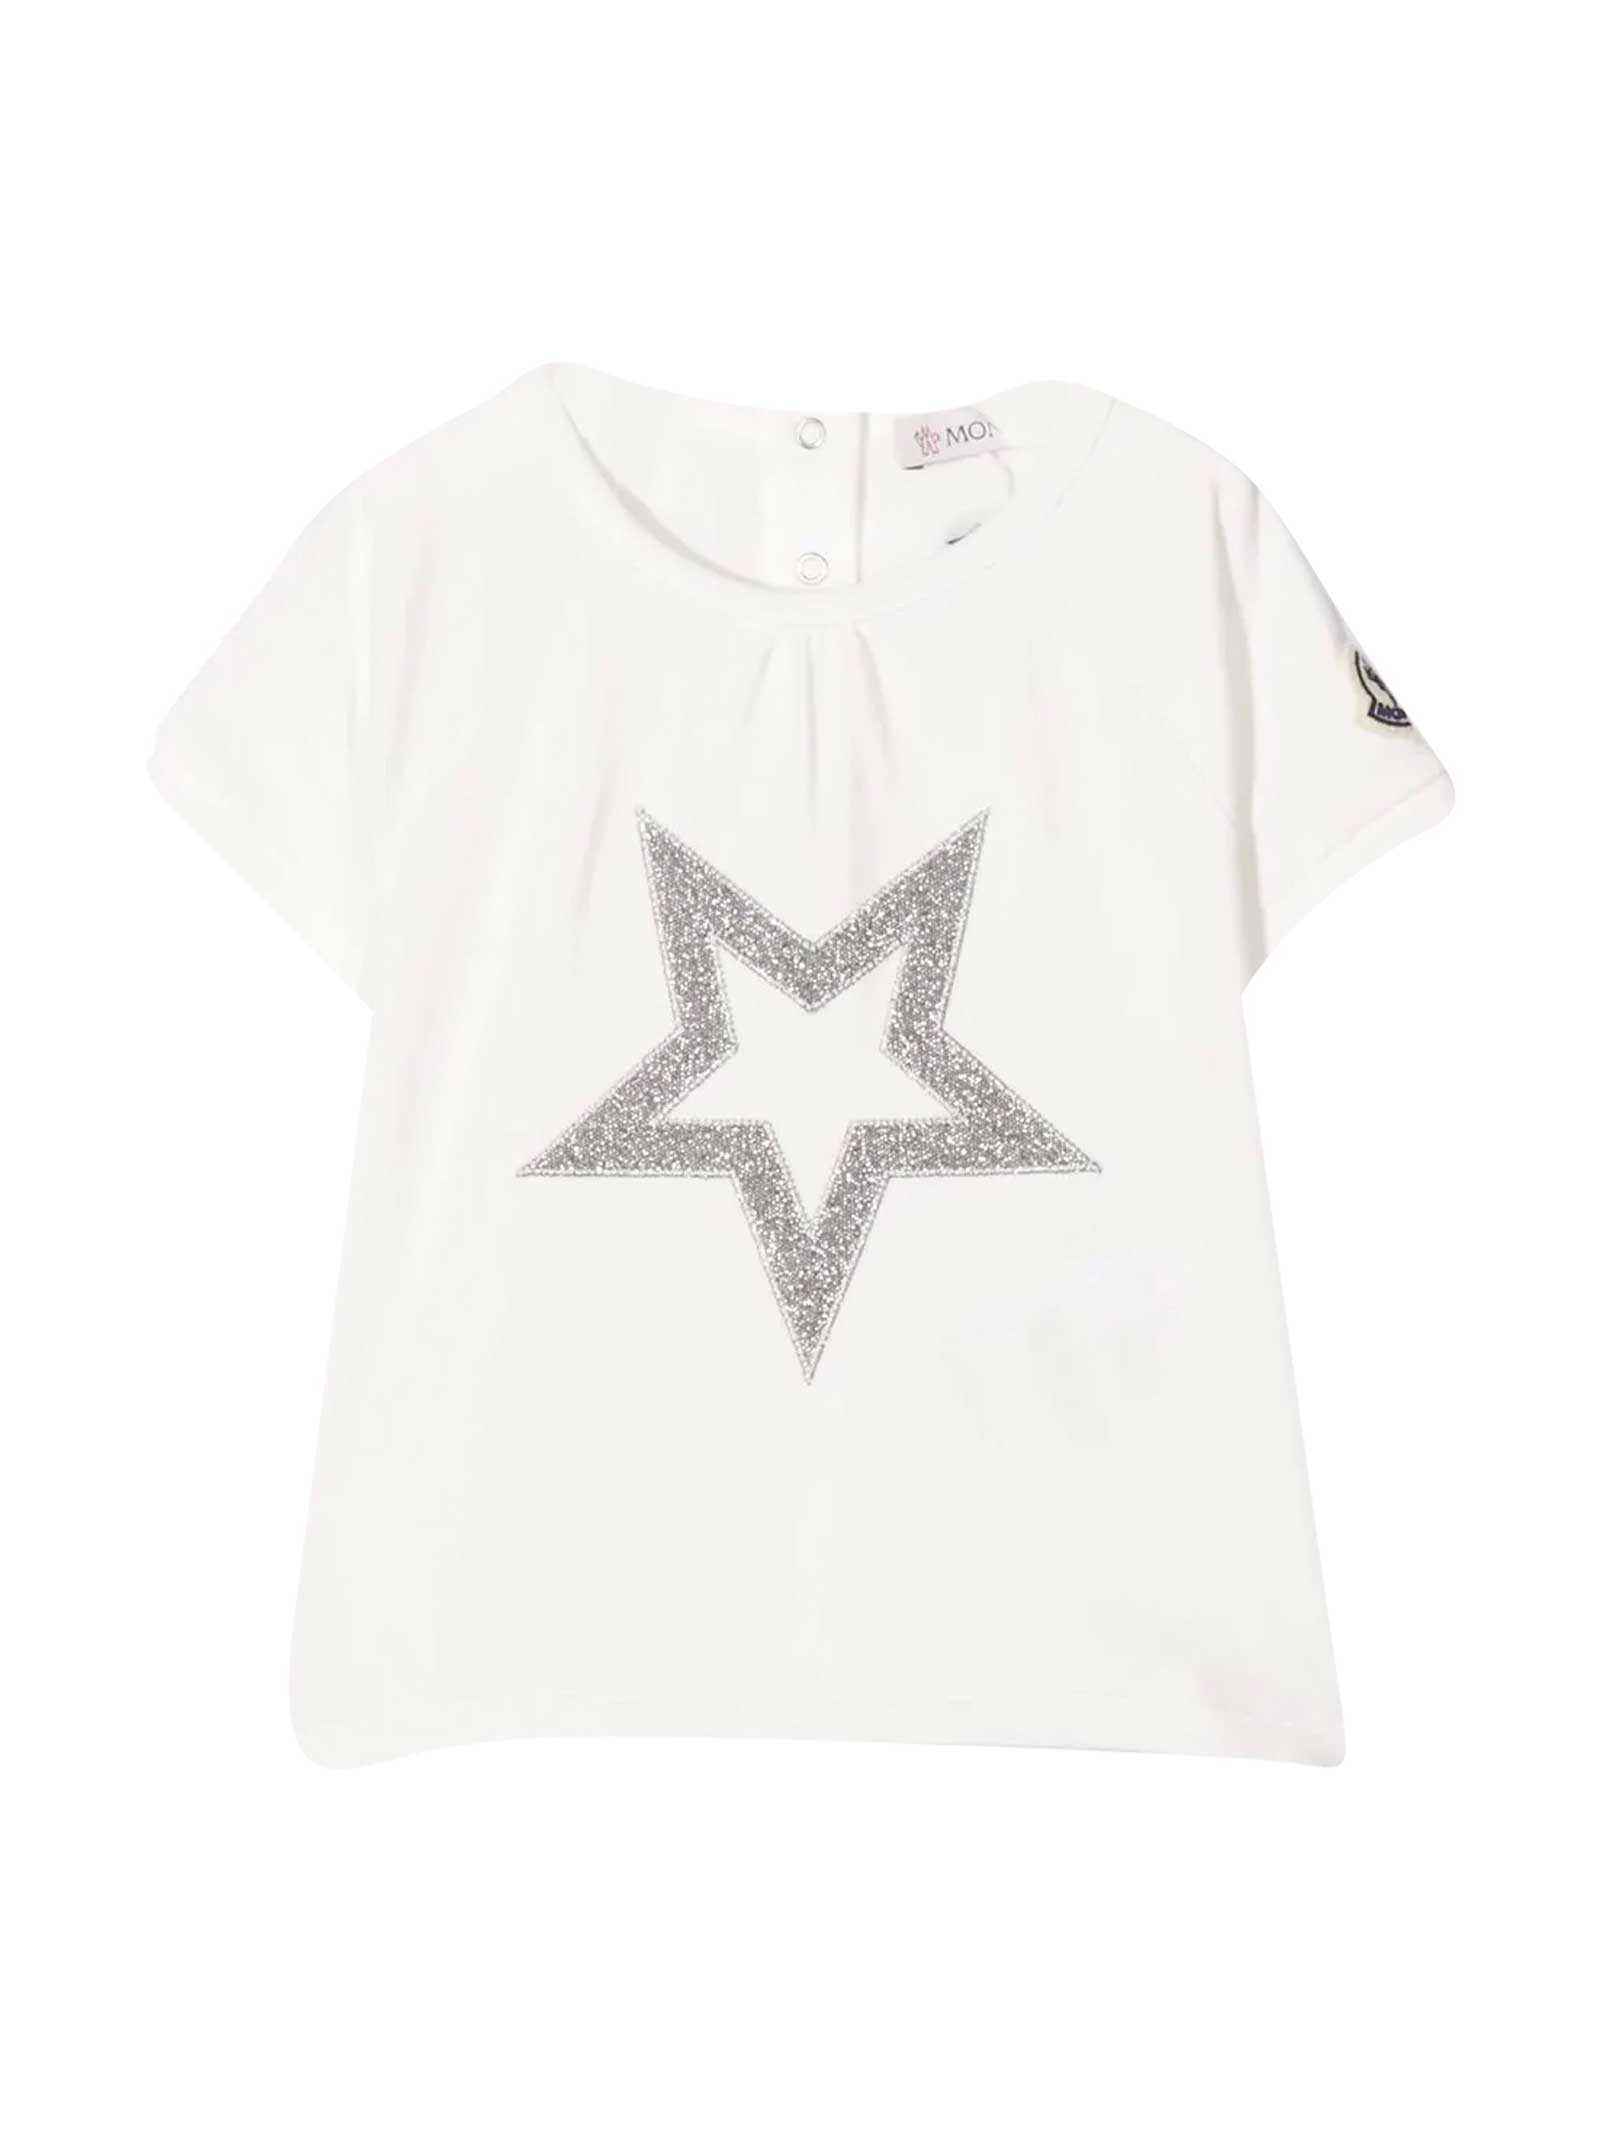 Moncler White T-shirt With Frontal Star Embroidery